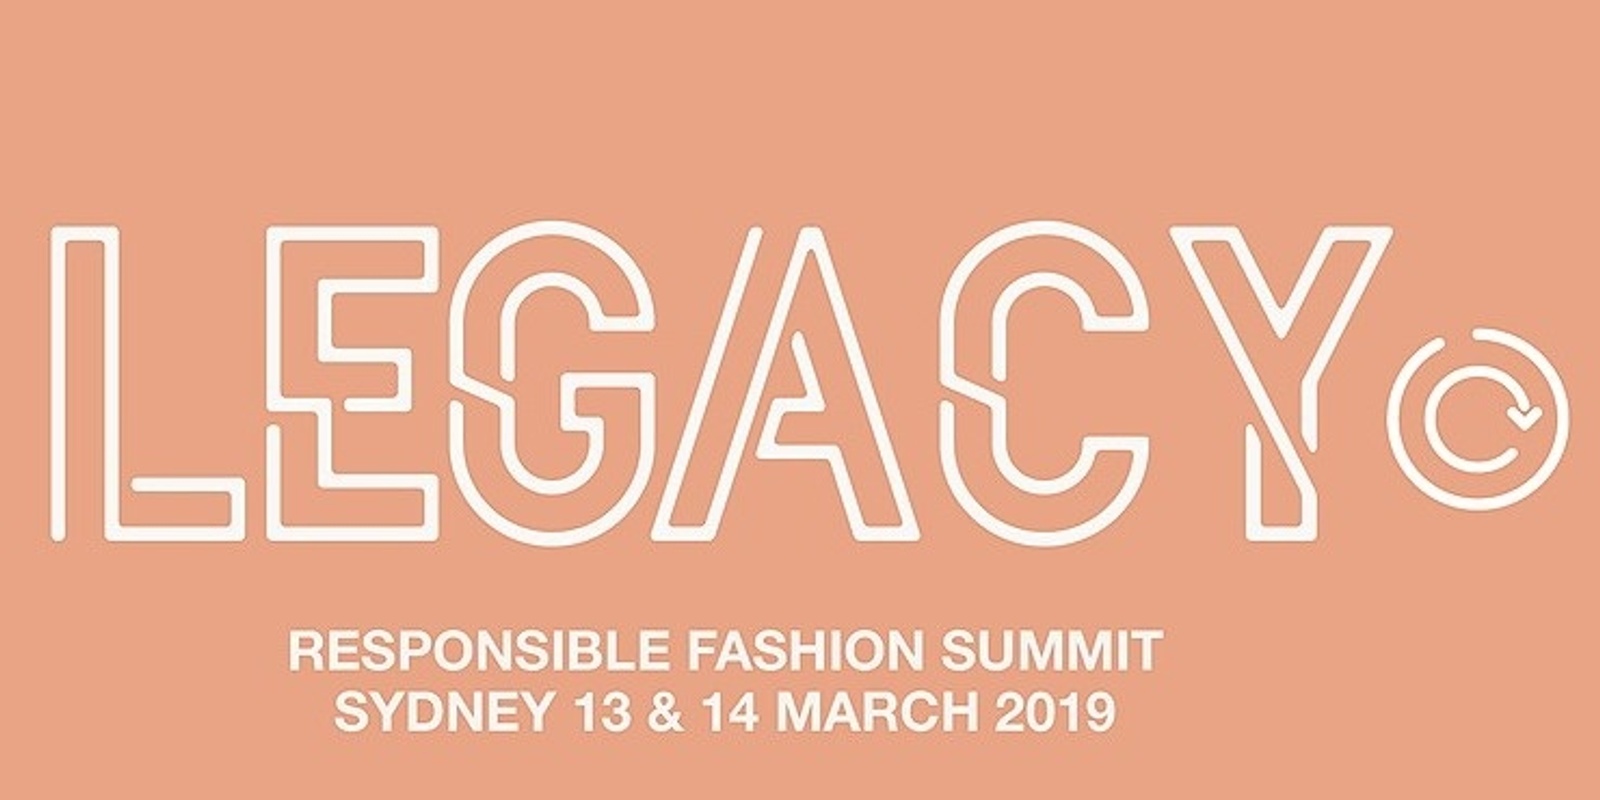 Banner image for LEGACY Responsible Fashion Summit, Sydney, 13 & 14 March 2019